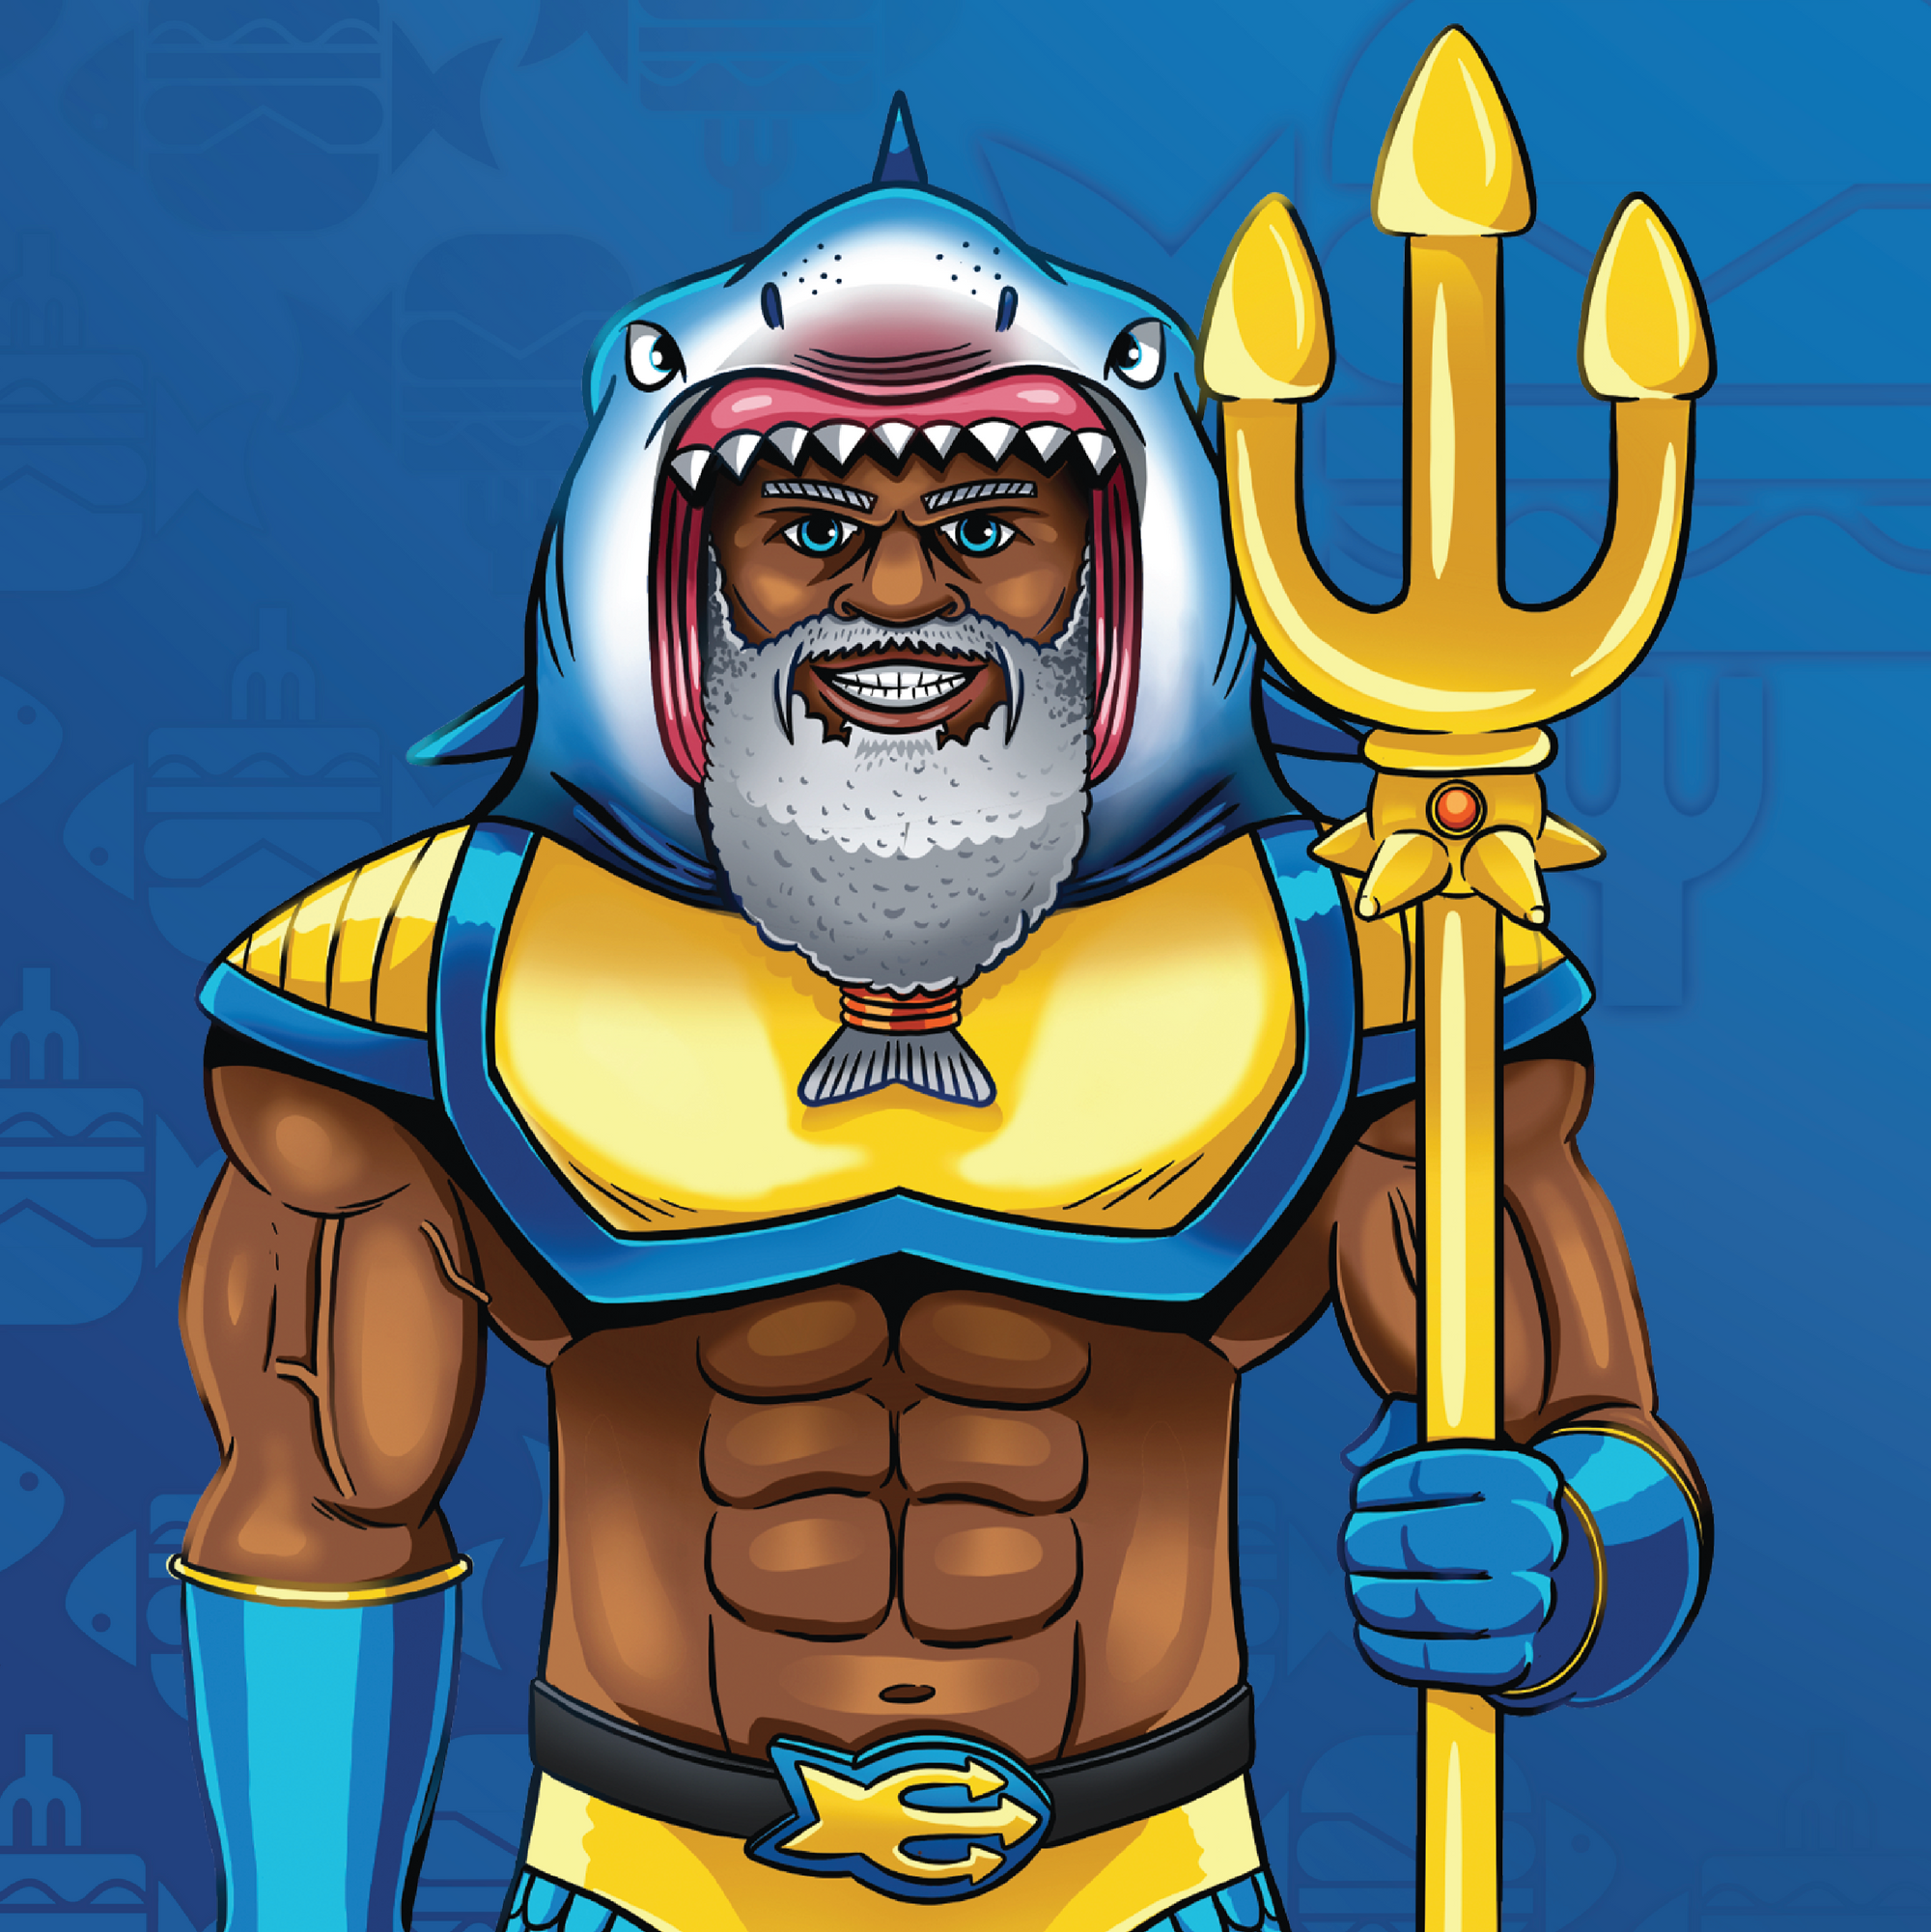 Comic style drawing of Greek Mythology character, Poseidon, action figure with trident and a cerulean blue shark hat